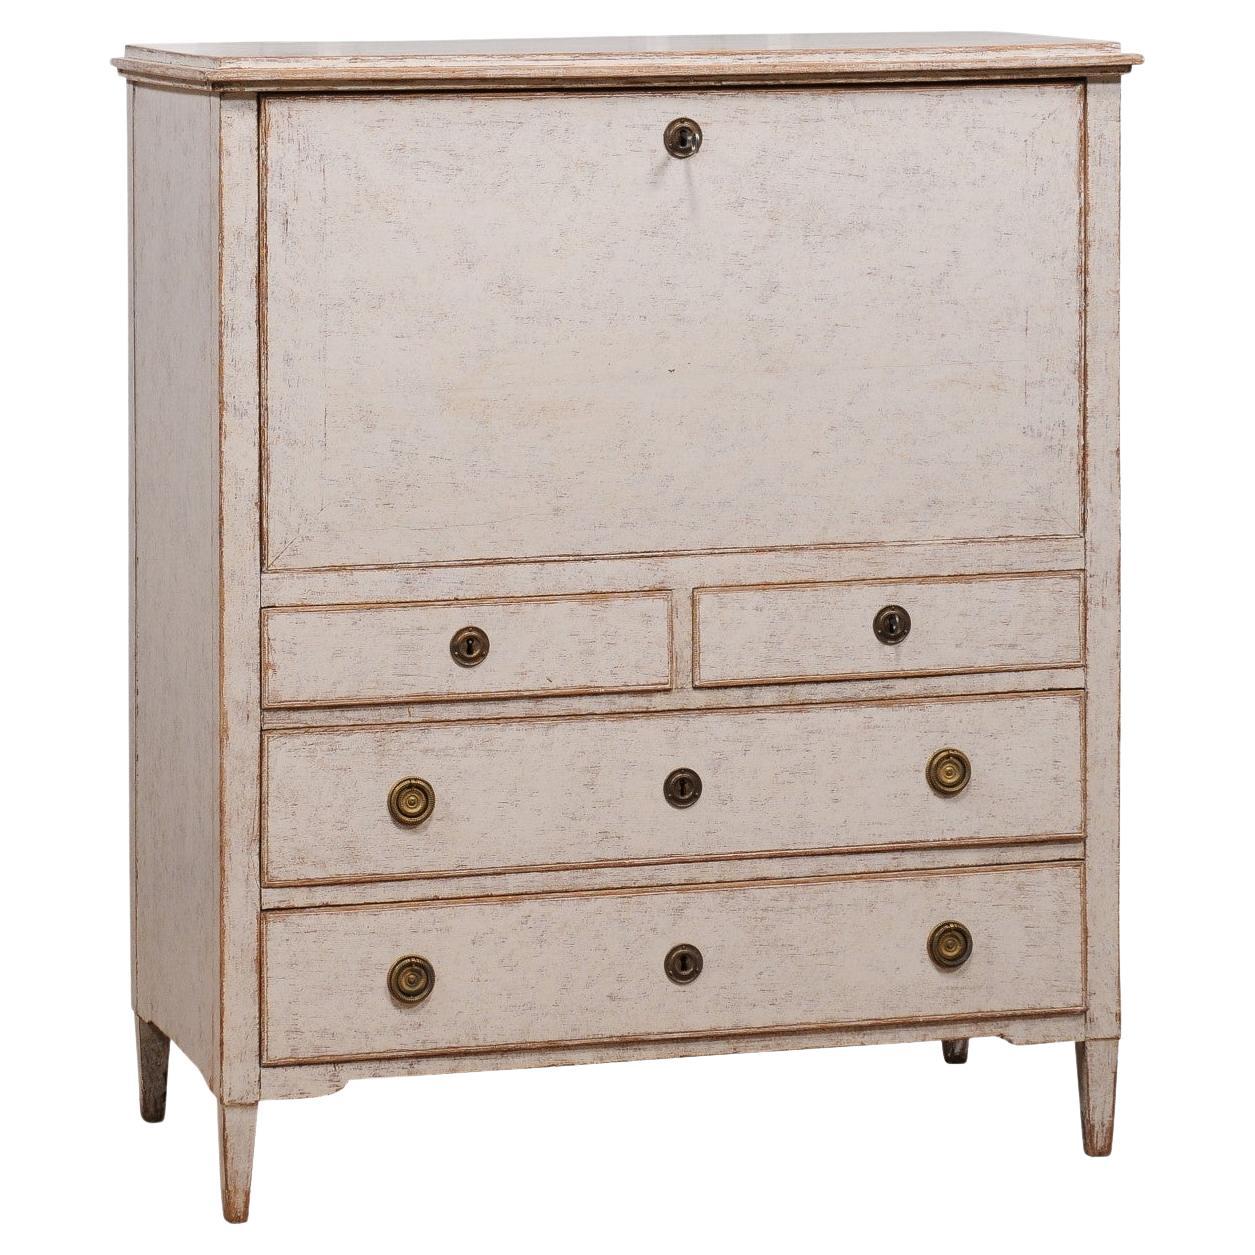 1780s Gustavian Period Swedish Grey Painted Drop-Front Secretary with Drawers For Sale